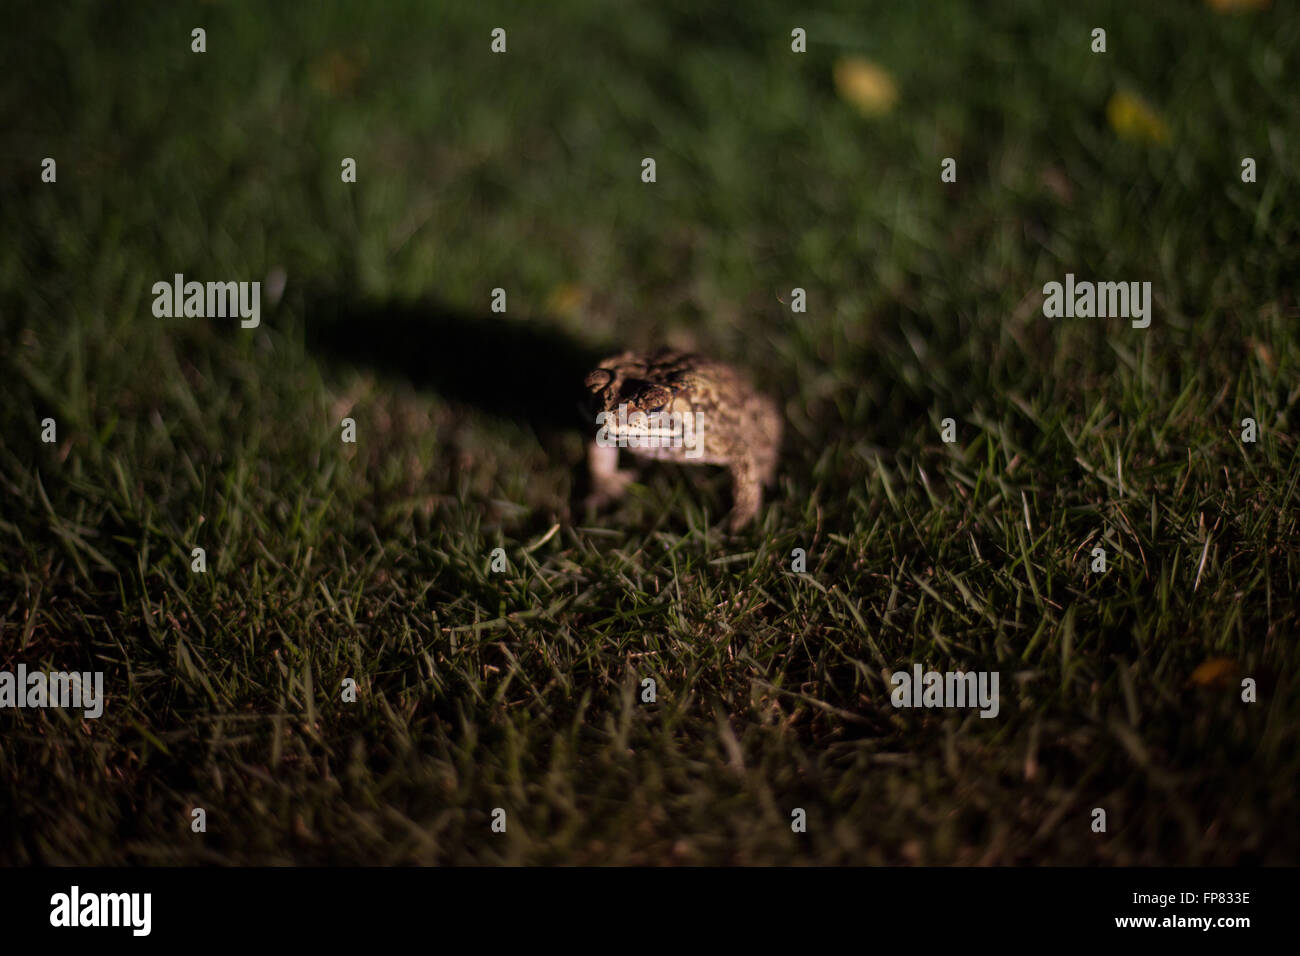 Close-Up Of Frog In Grassy Field At Night Stock Photo